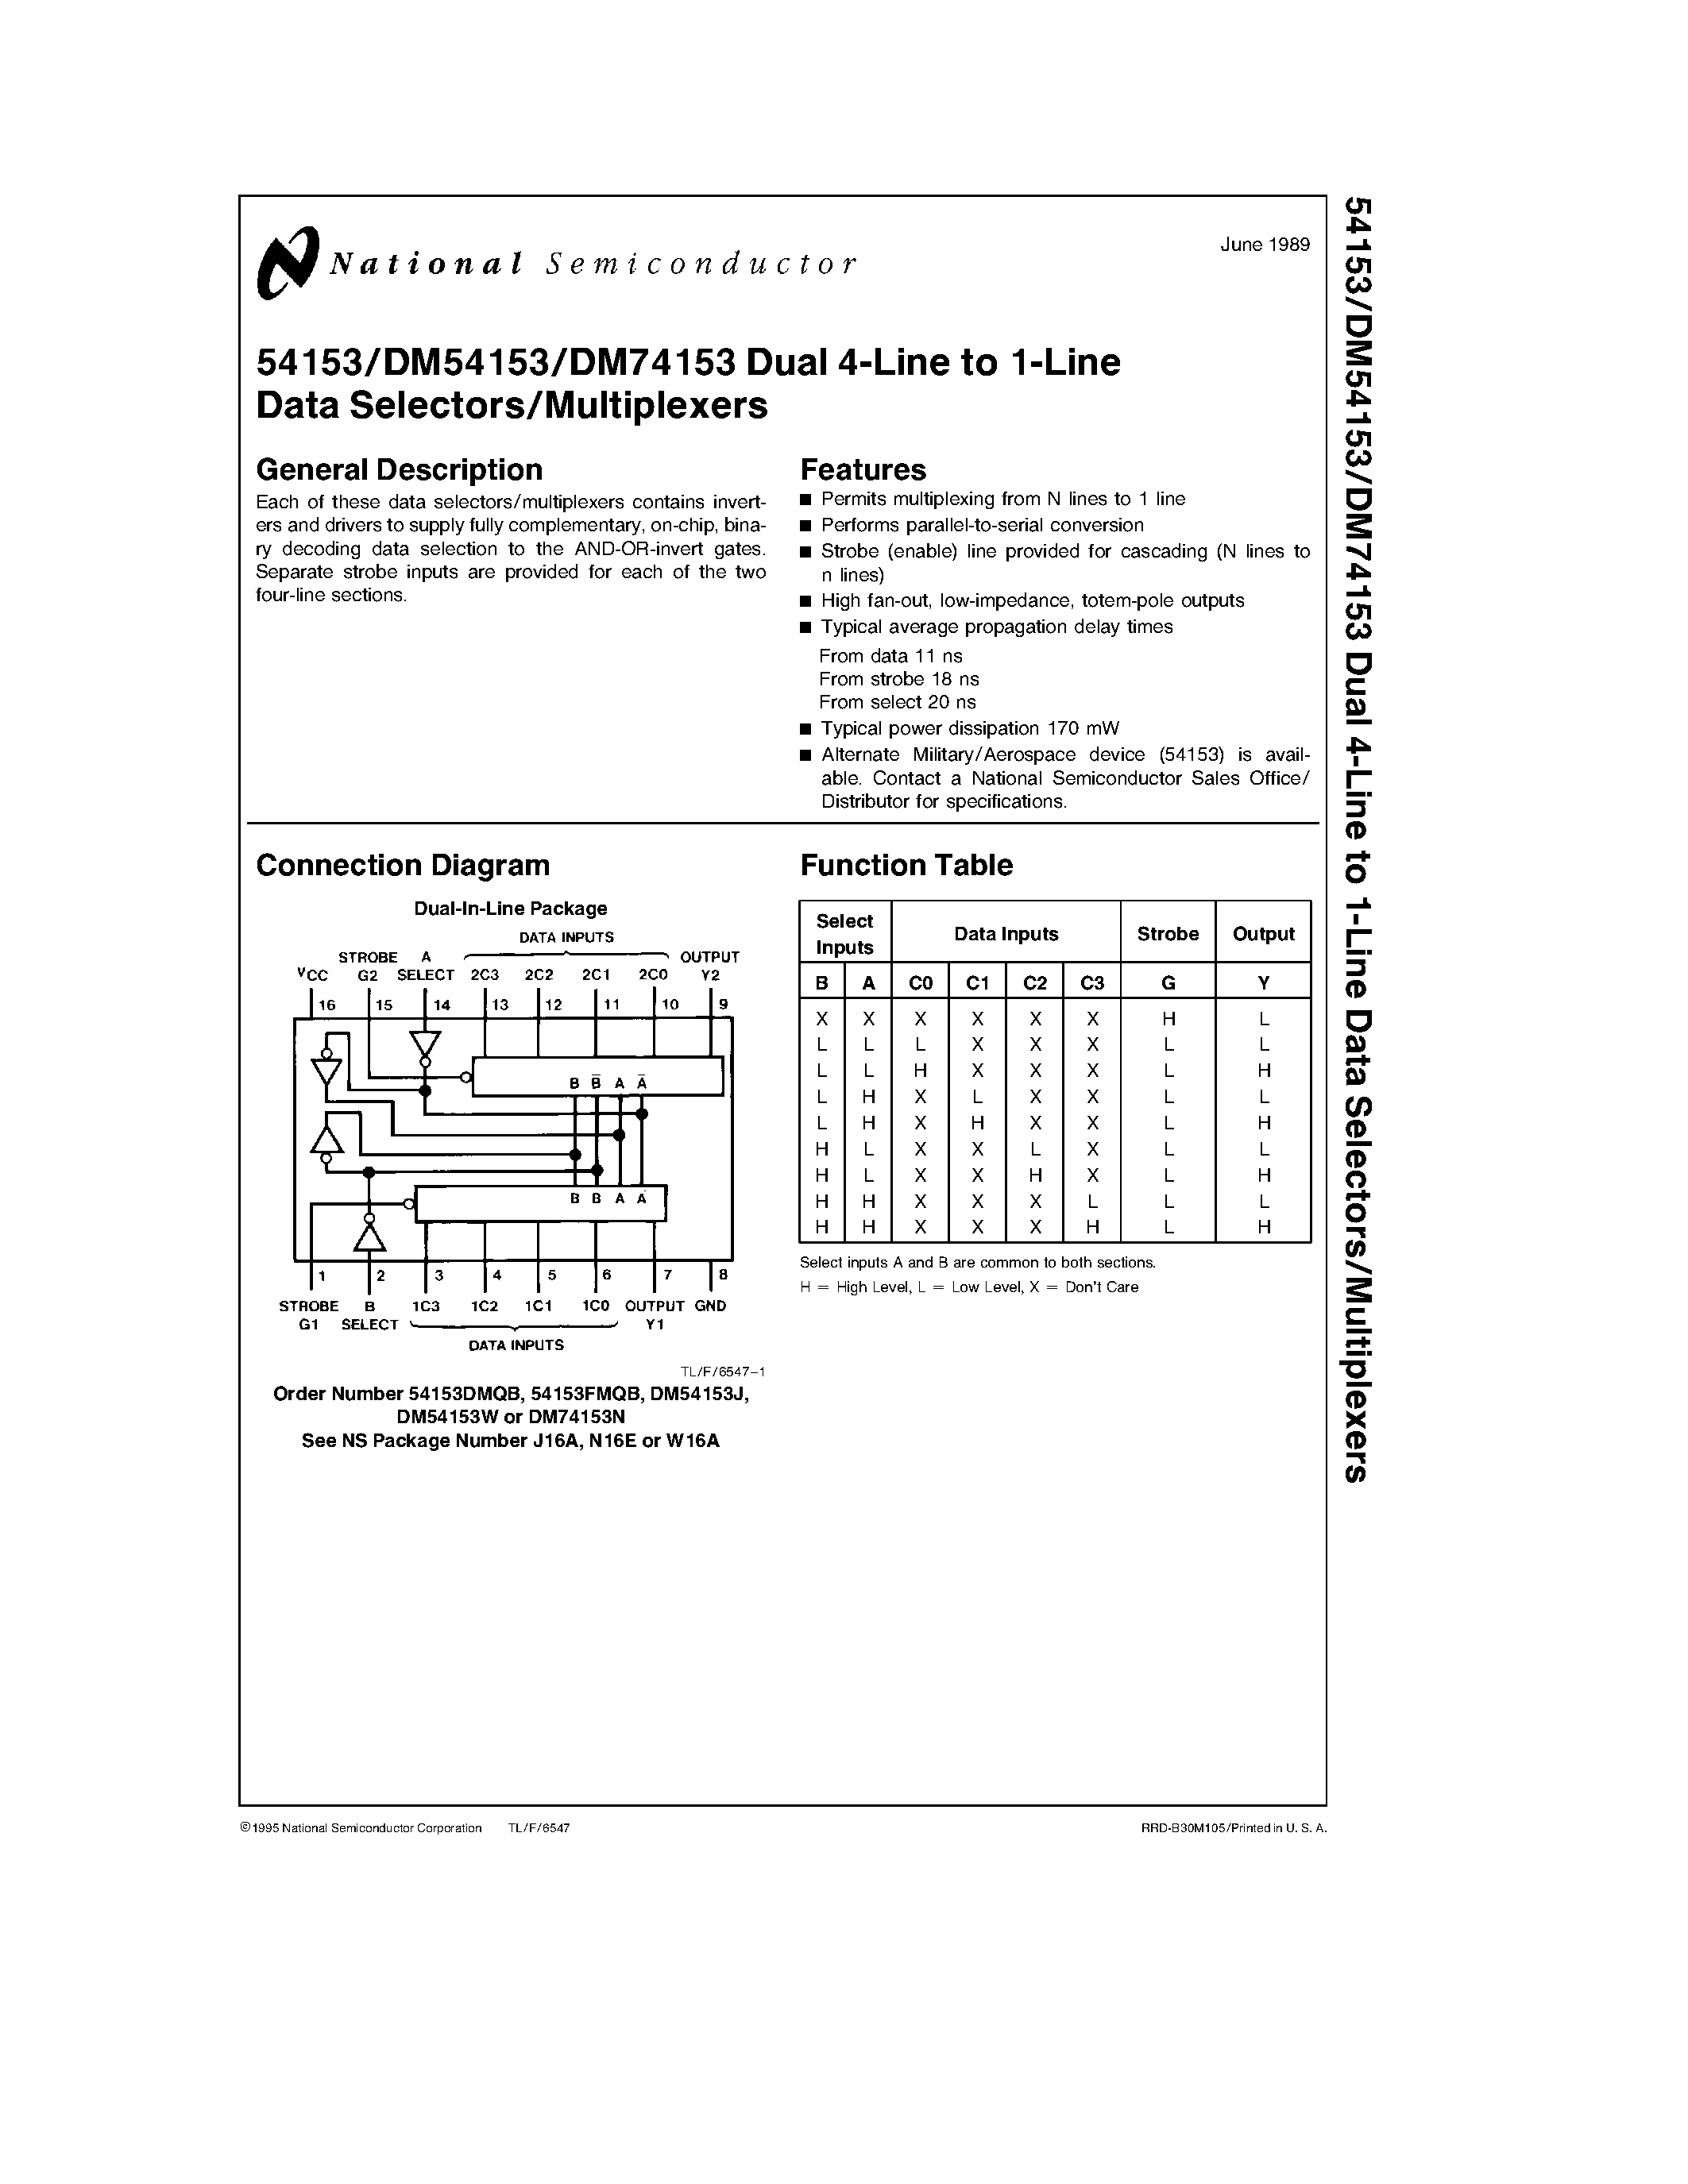 Datasheet 74153 - Dual 4-Line to 1-Line Data Selectors/Multiplexers page 1